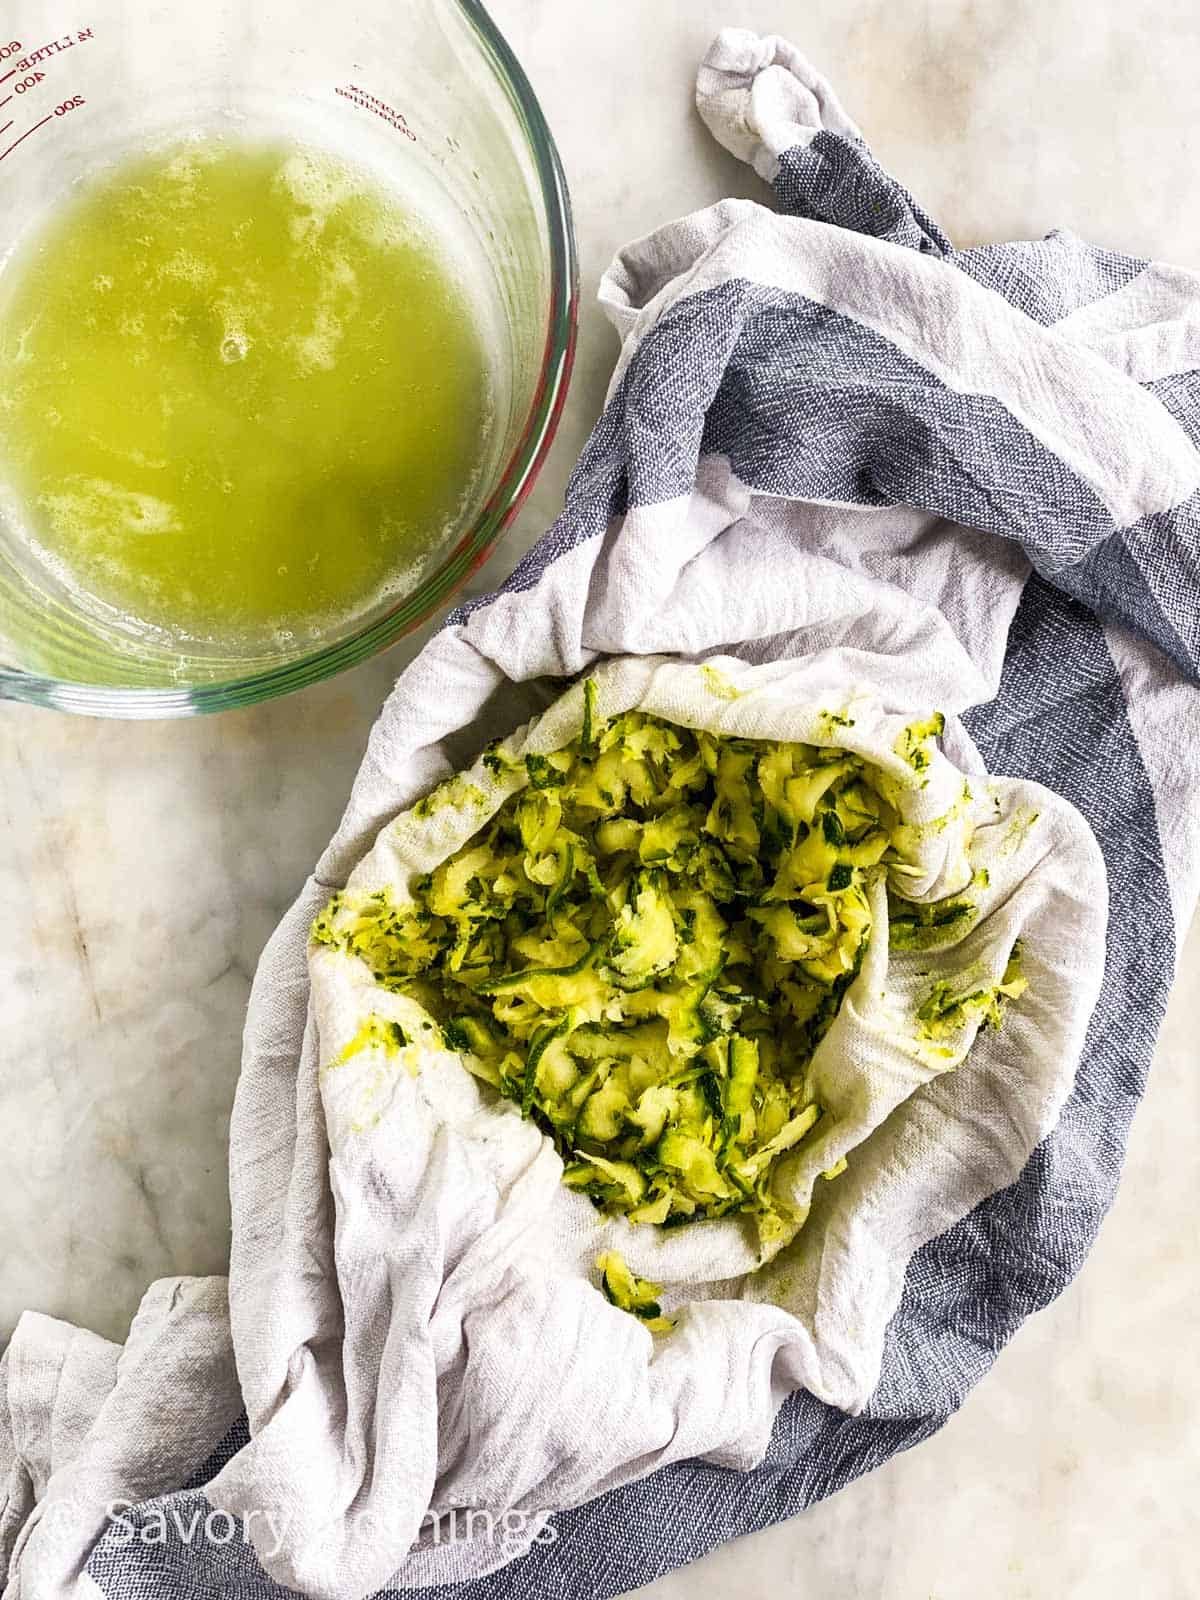 shredded and squeezed zucchini nestled in middle of blue and white kitchen towel next to glass measuring jug with zucchini juices